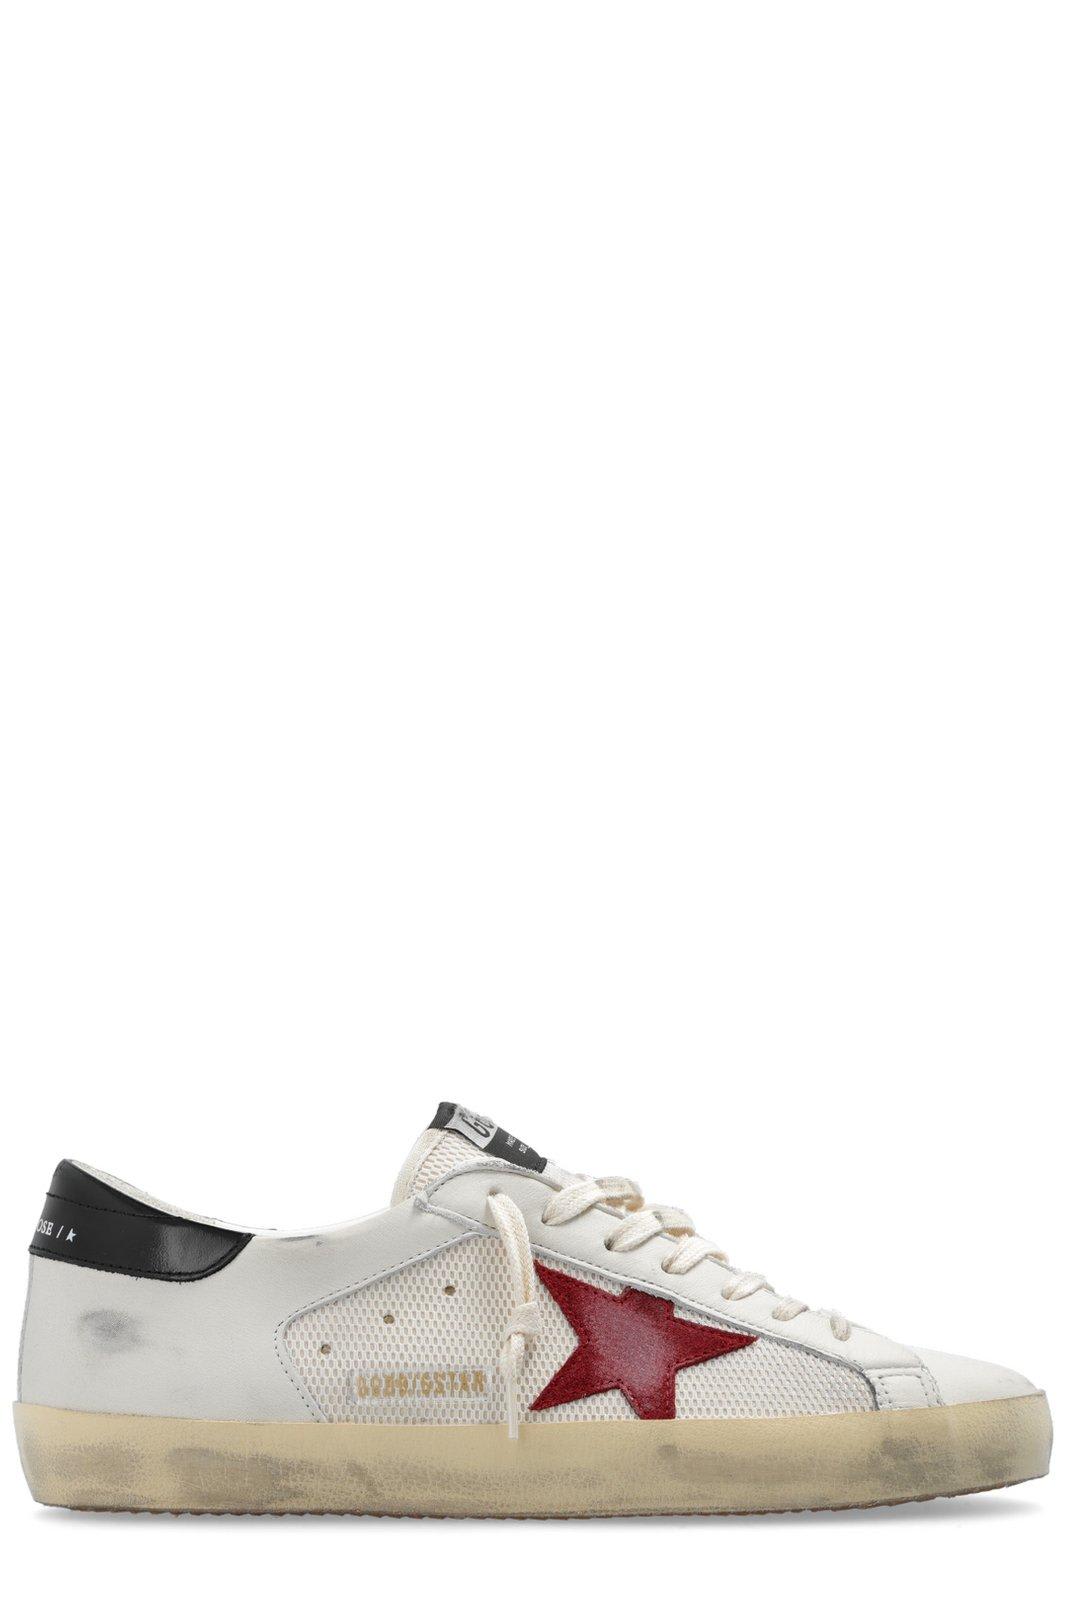 Shop Golden Goose Superstar Lace-up Sneakers In White/pomegranate/